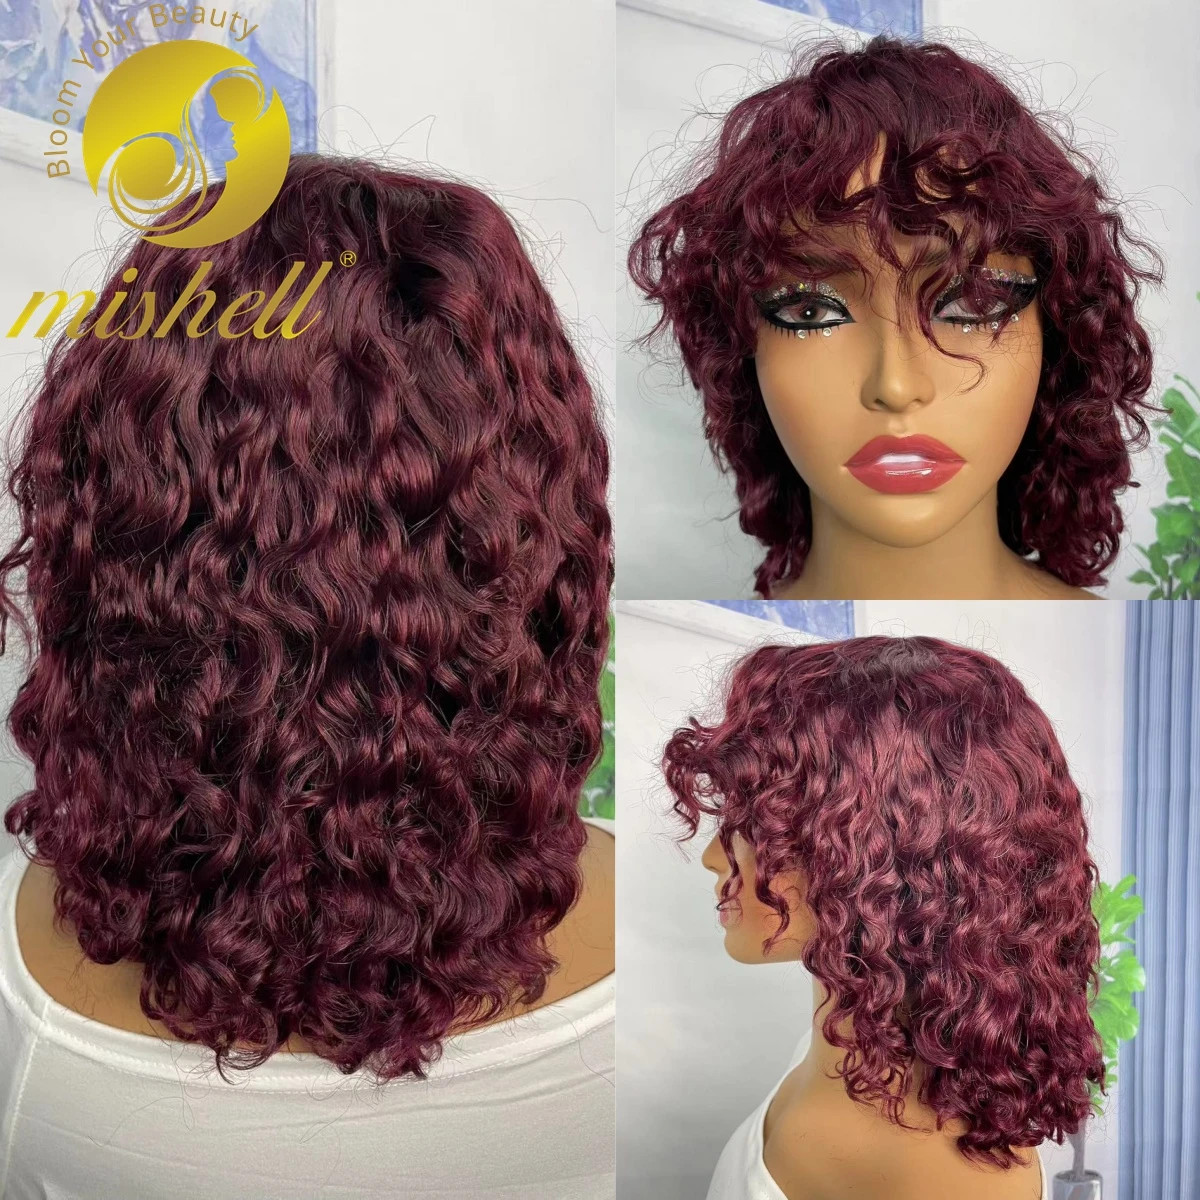 

99J Burgundy Full Machine Made Water Wave Wig with Bangs 200% Density Short Jerry Curly Human Hair Bob Wigs 12inch for Women